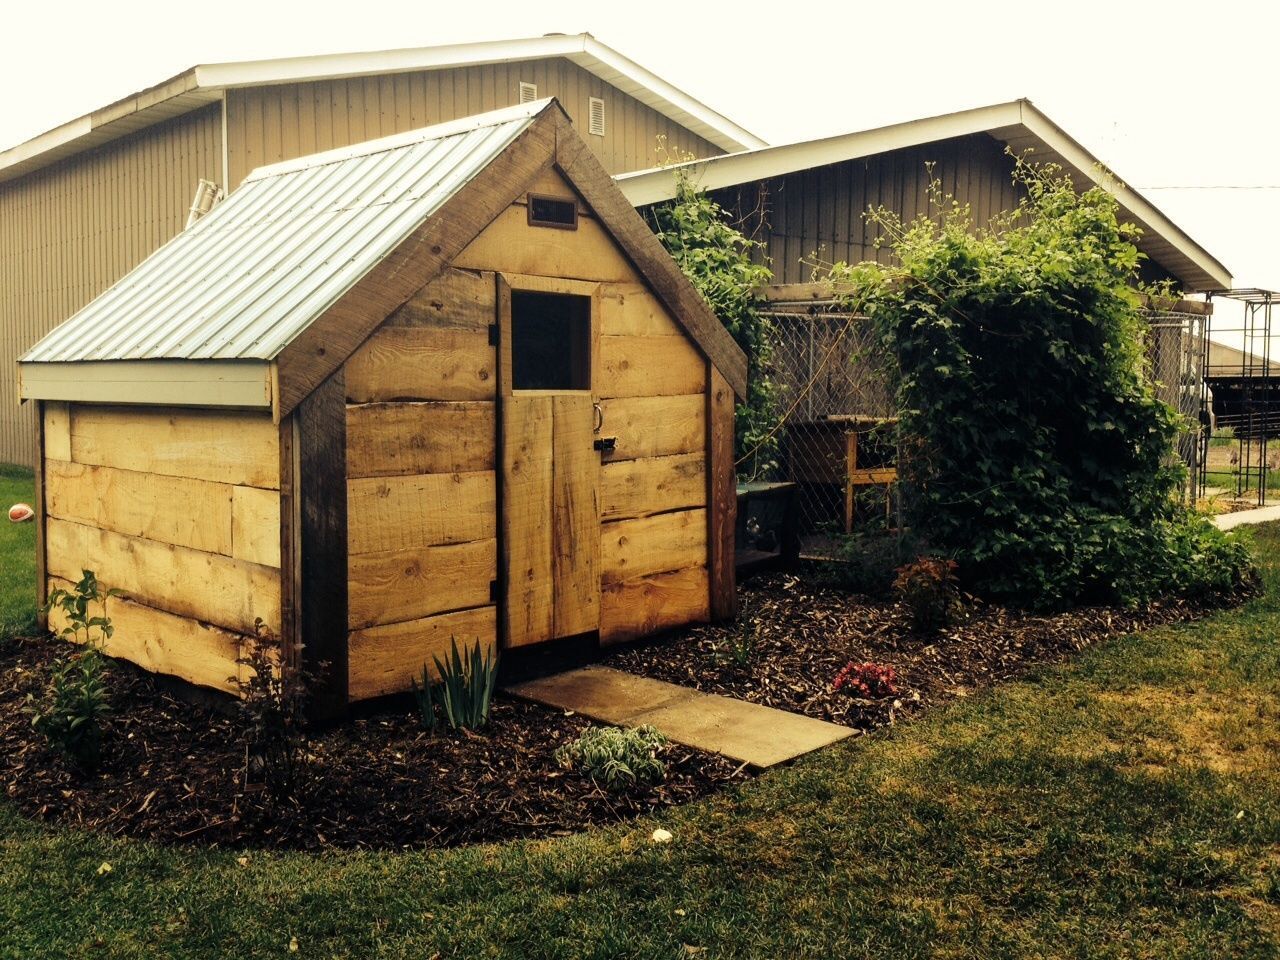 post your chicken coop pictures here! - Page 402